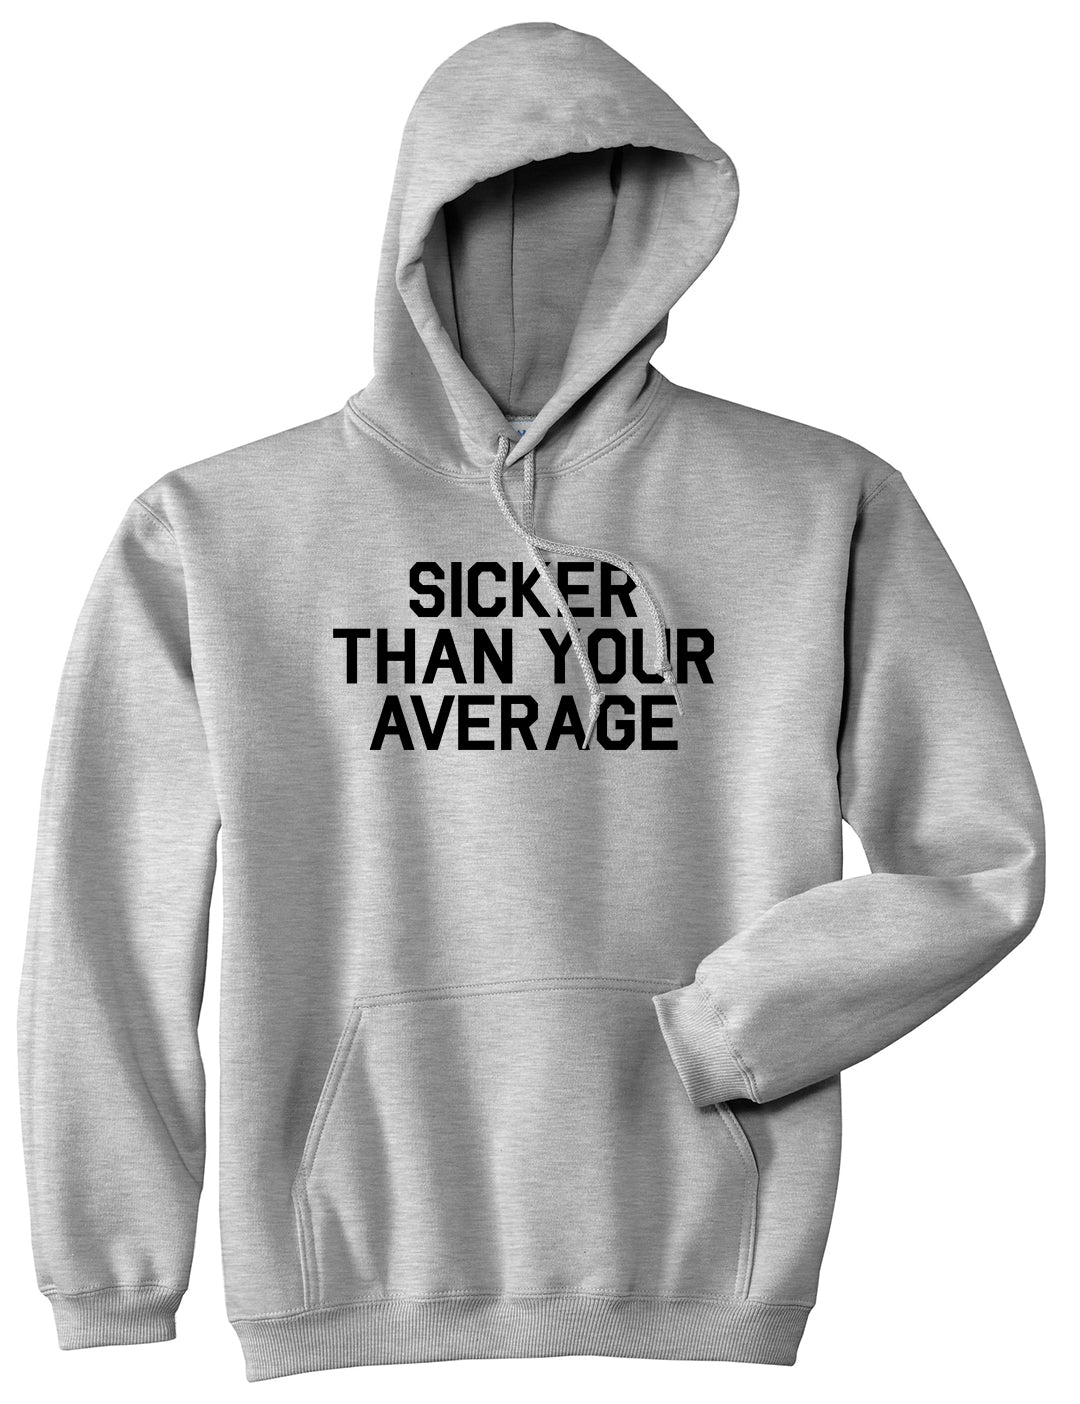 Sicker Than Your Average Pullover Hoodie in Grey